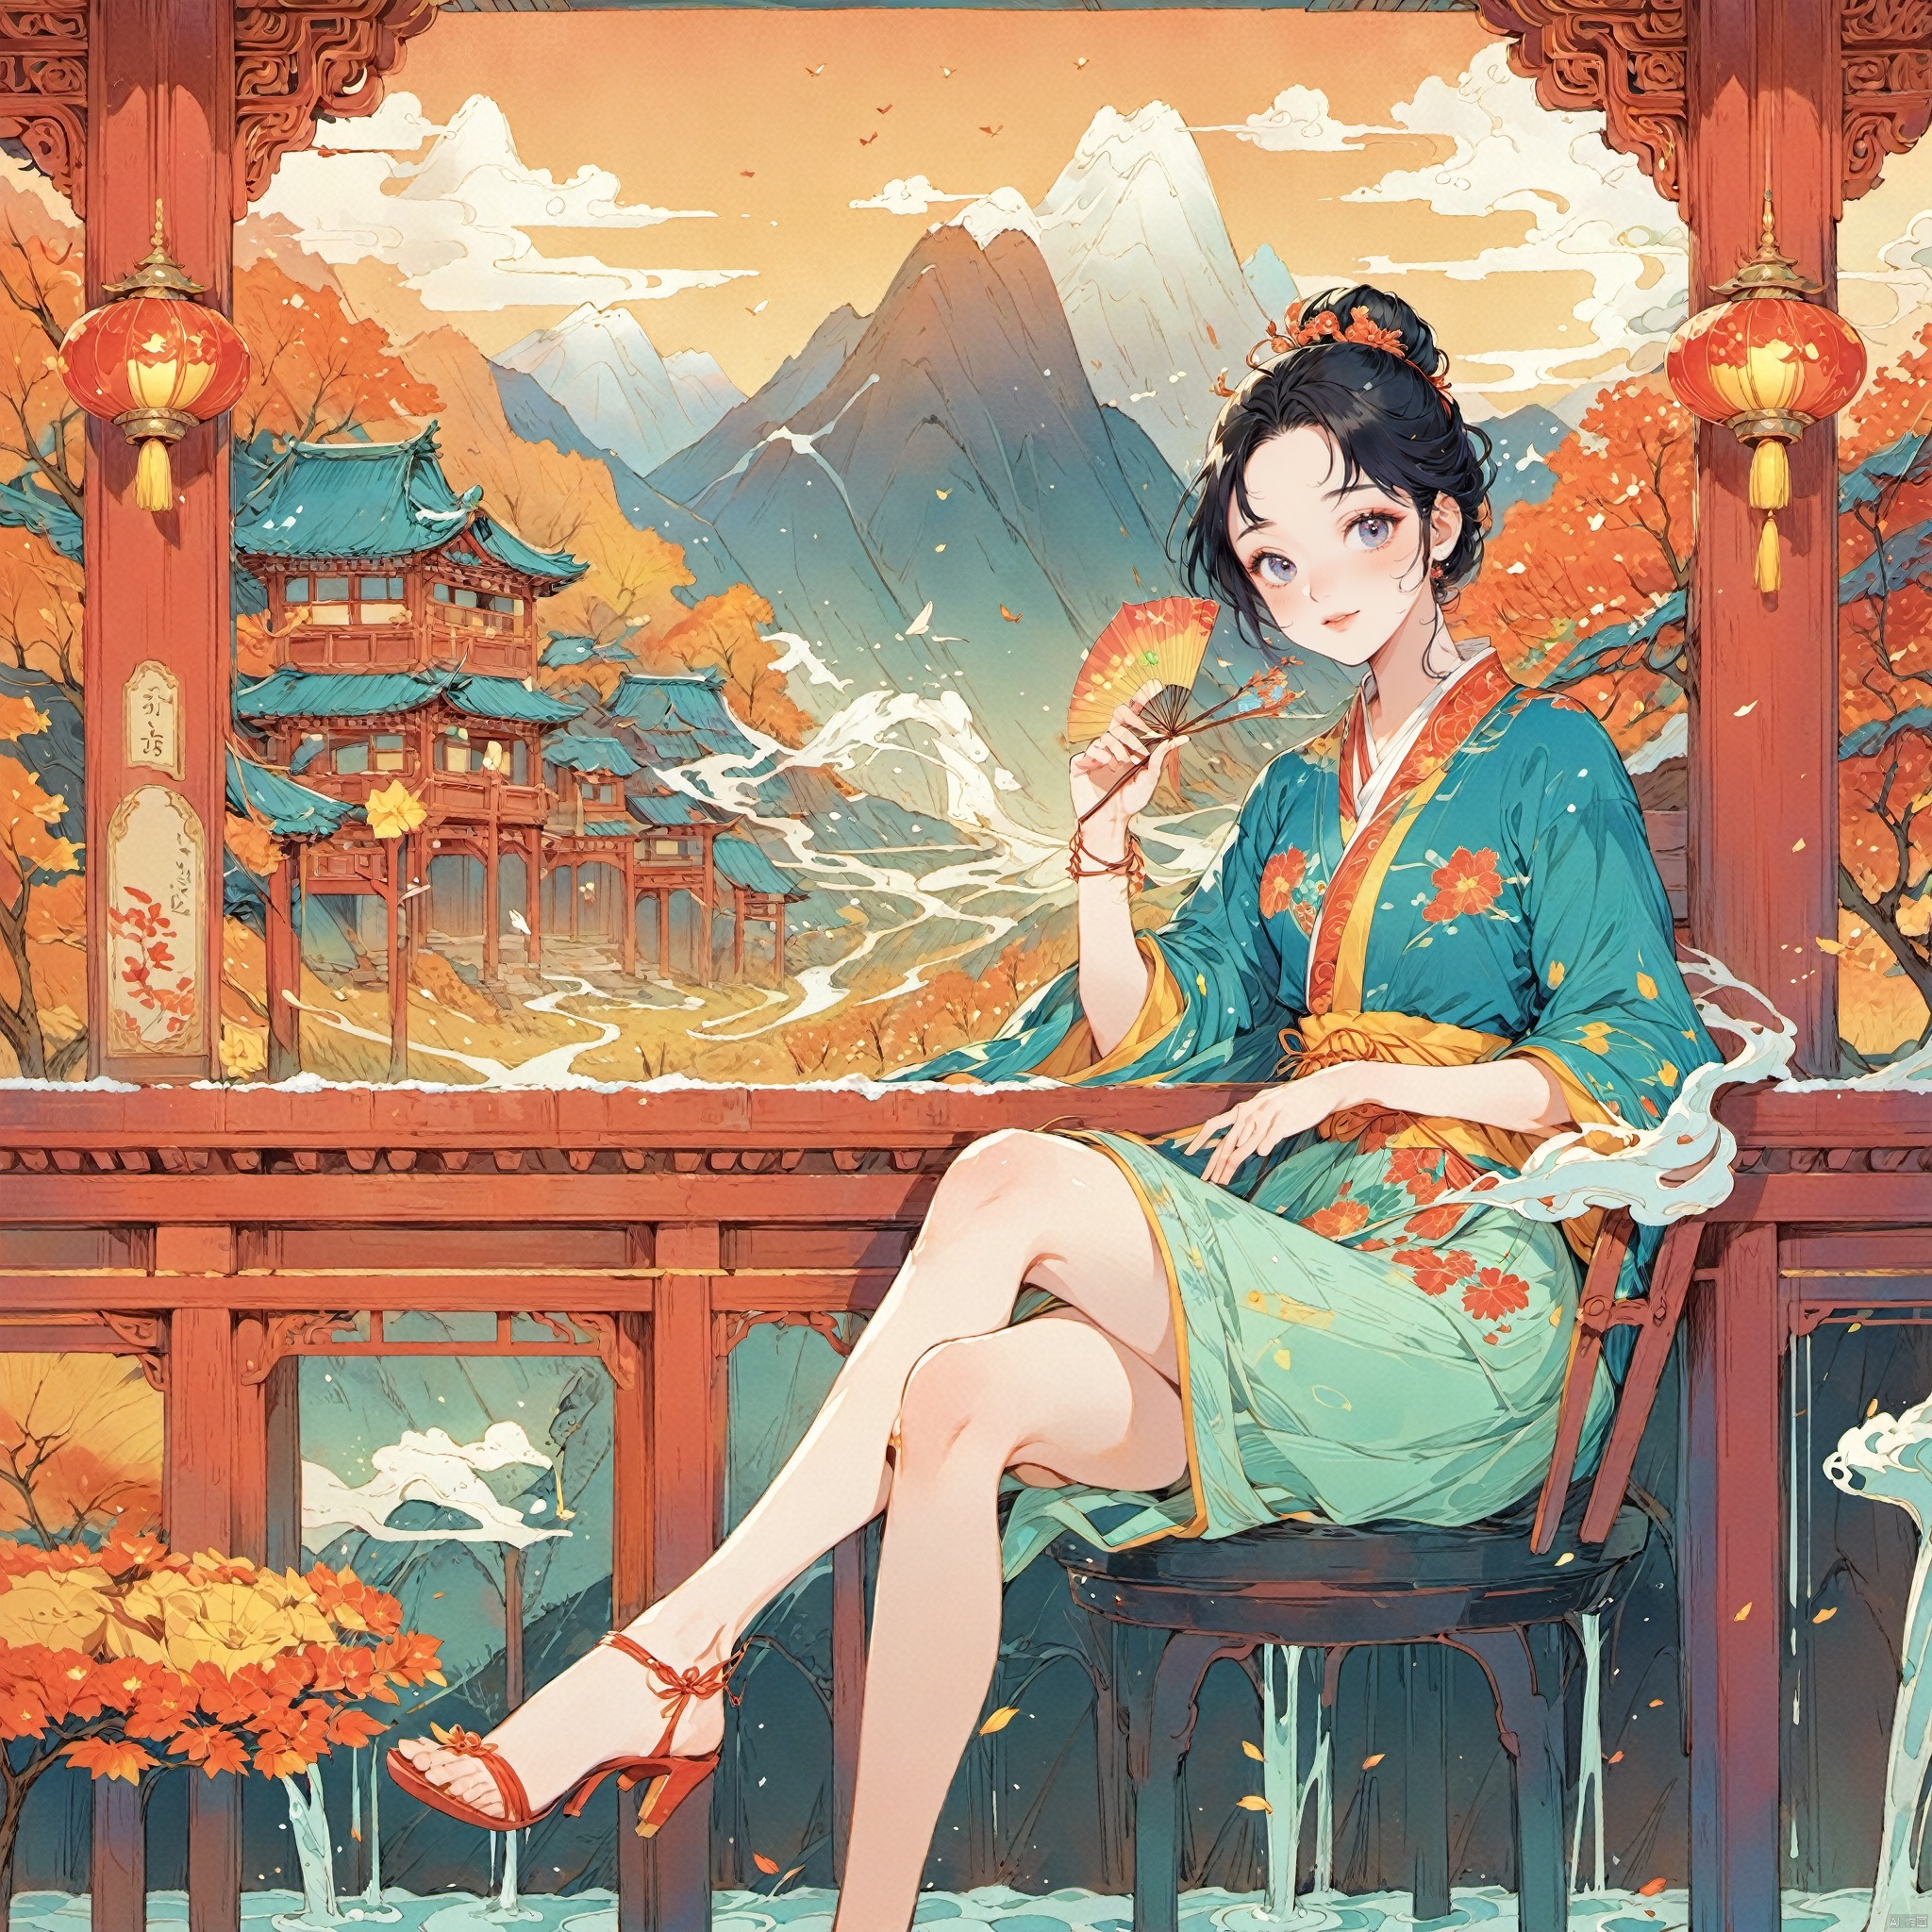 flat_style,simple_colors,masterpiece,{{{best_quality}}},{{ultra-detailed}},Hanfu,Holding a fan,{{1girl}},{{{solo}}},
an_extremely_delicate_and_beautifu,blank_stare,close_to_viewer,breeze,Flying_splashes,Flying_petals,wind,Gorgeous and rich graphics,
symmetrical composition,Beautiful face,looks like tangwei,cute,seductive smile,looking at the audience,big eyes,charming eyes,perfect figure,black hair, Illustration
pov,Distant snow mountains,and grasslands,
Autumn, red leaves, yellow leaves, Illustration